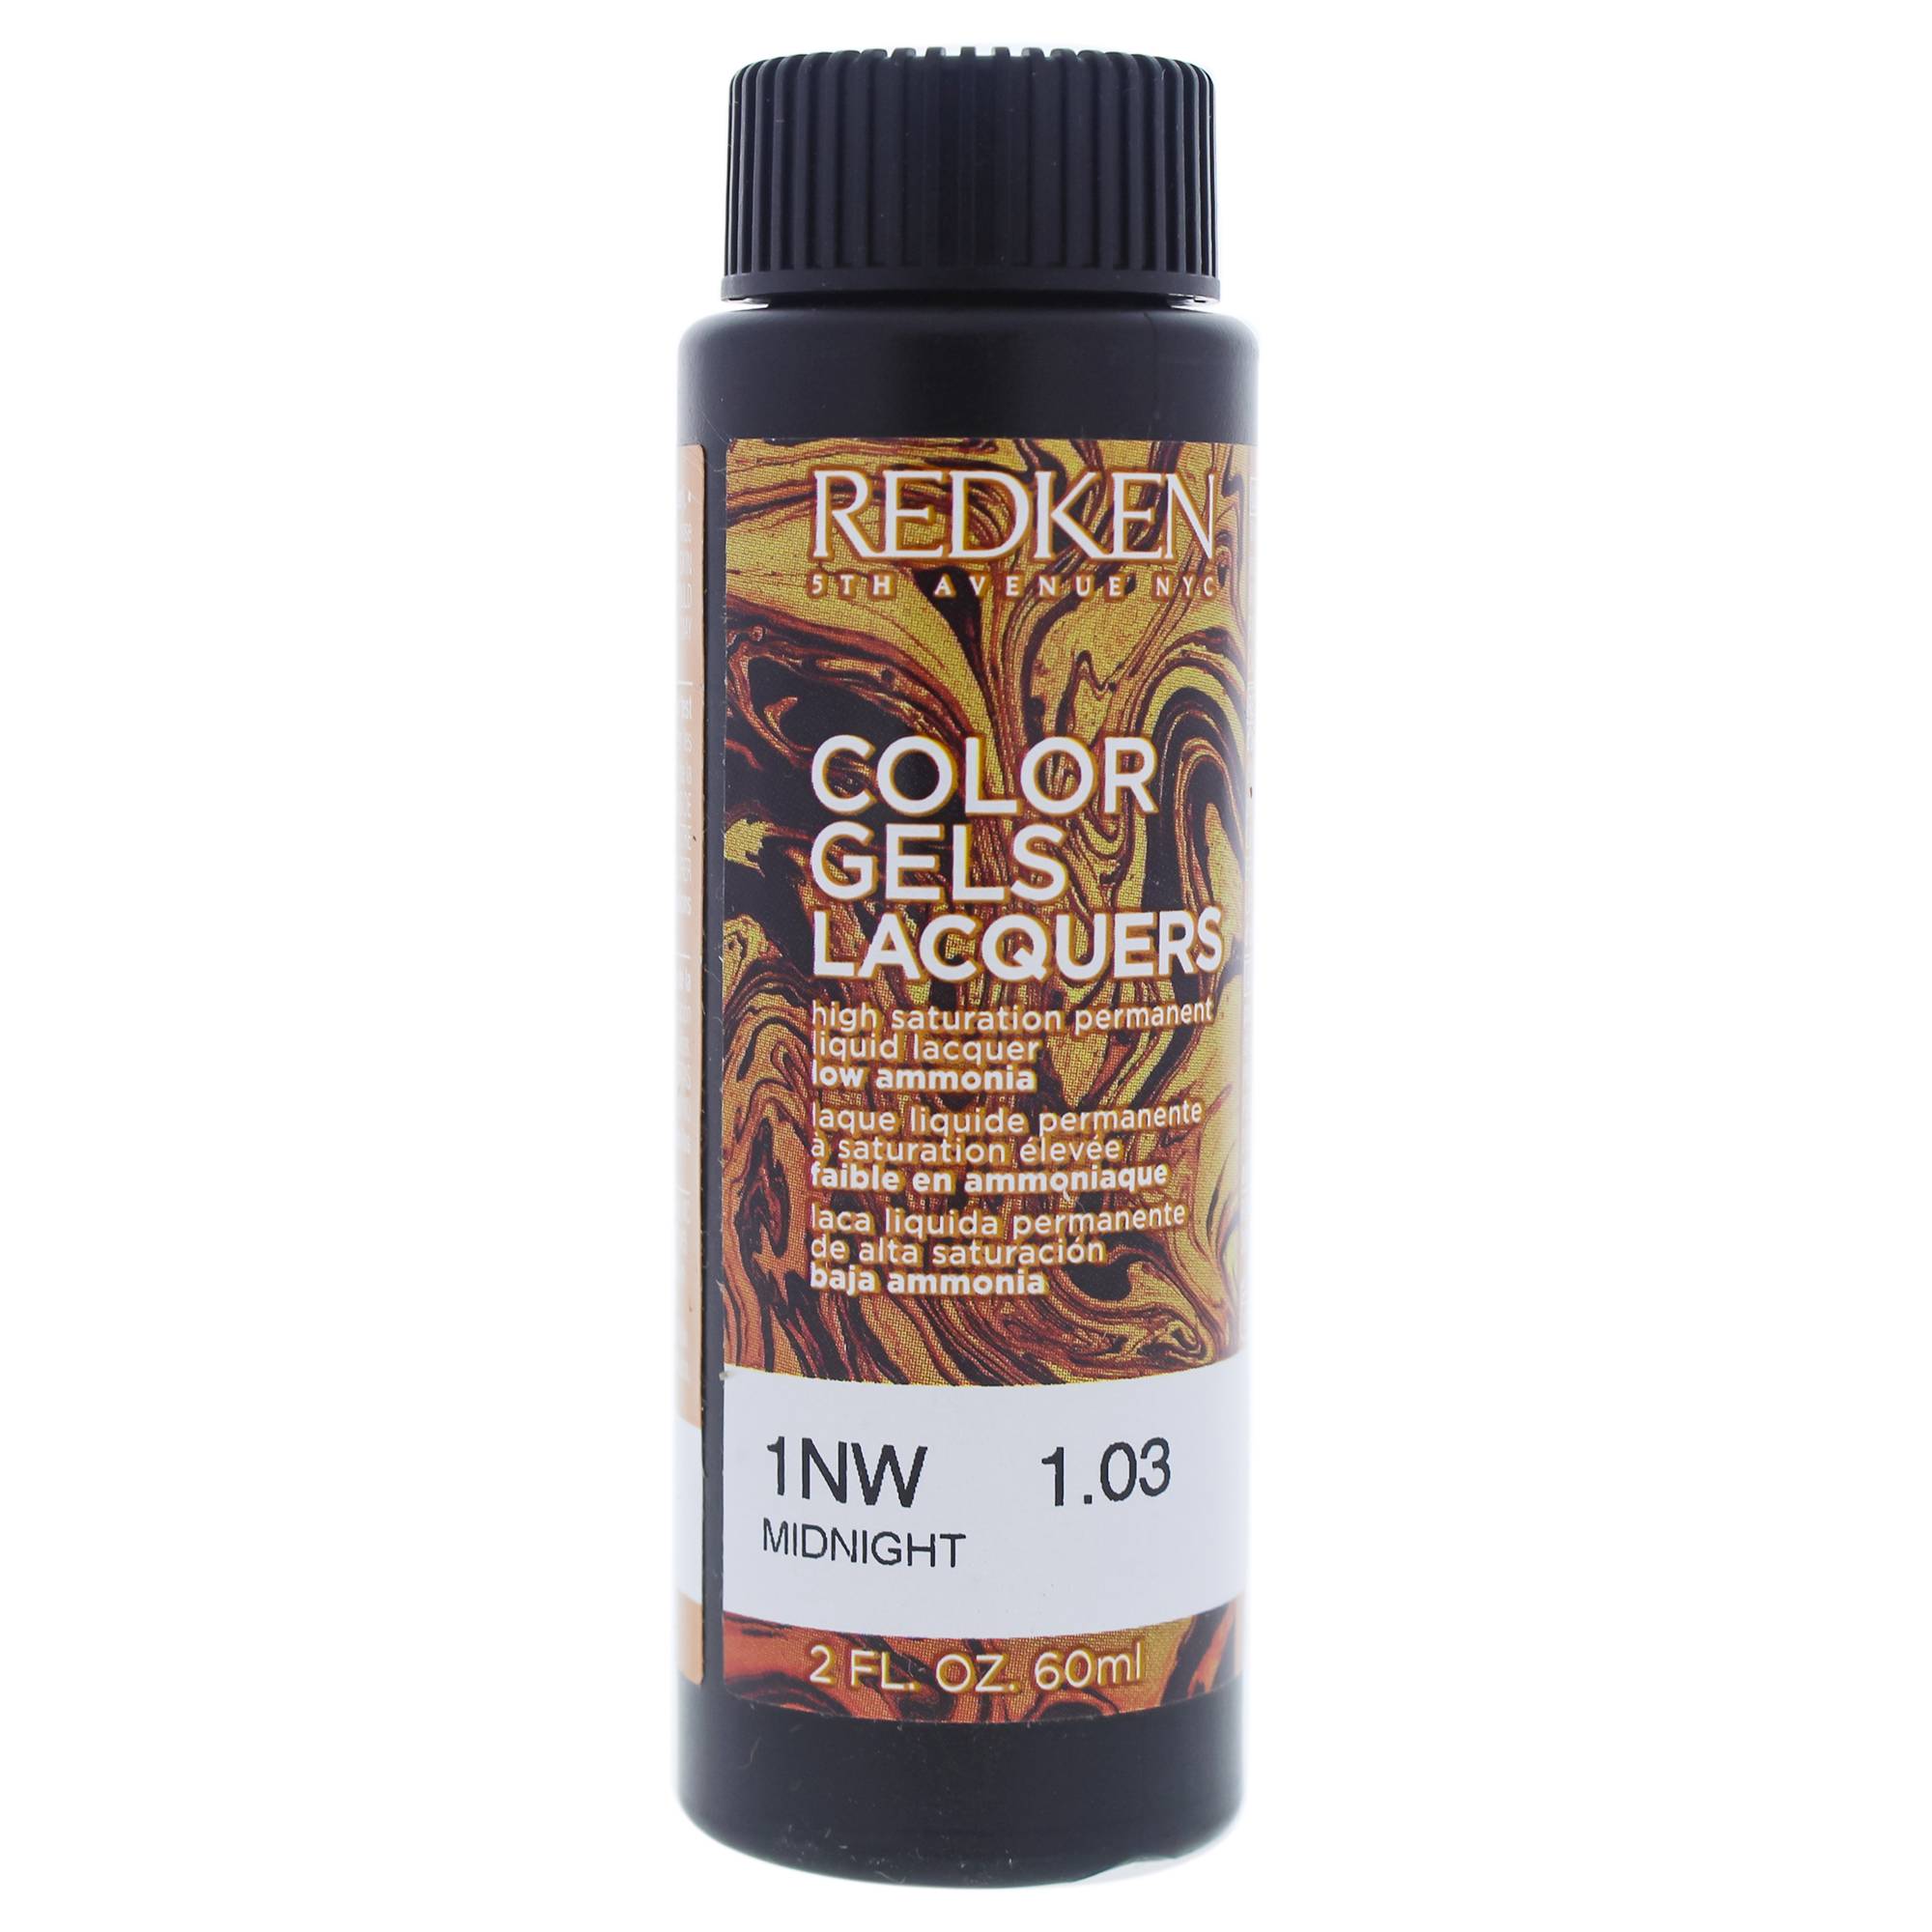 Redken Color Gels Lacquers 1NW Midnight - Полночь 60 мл.